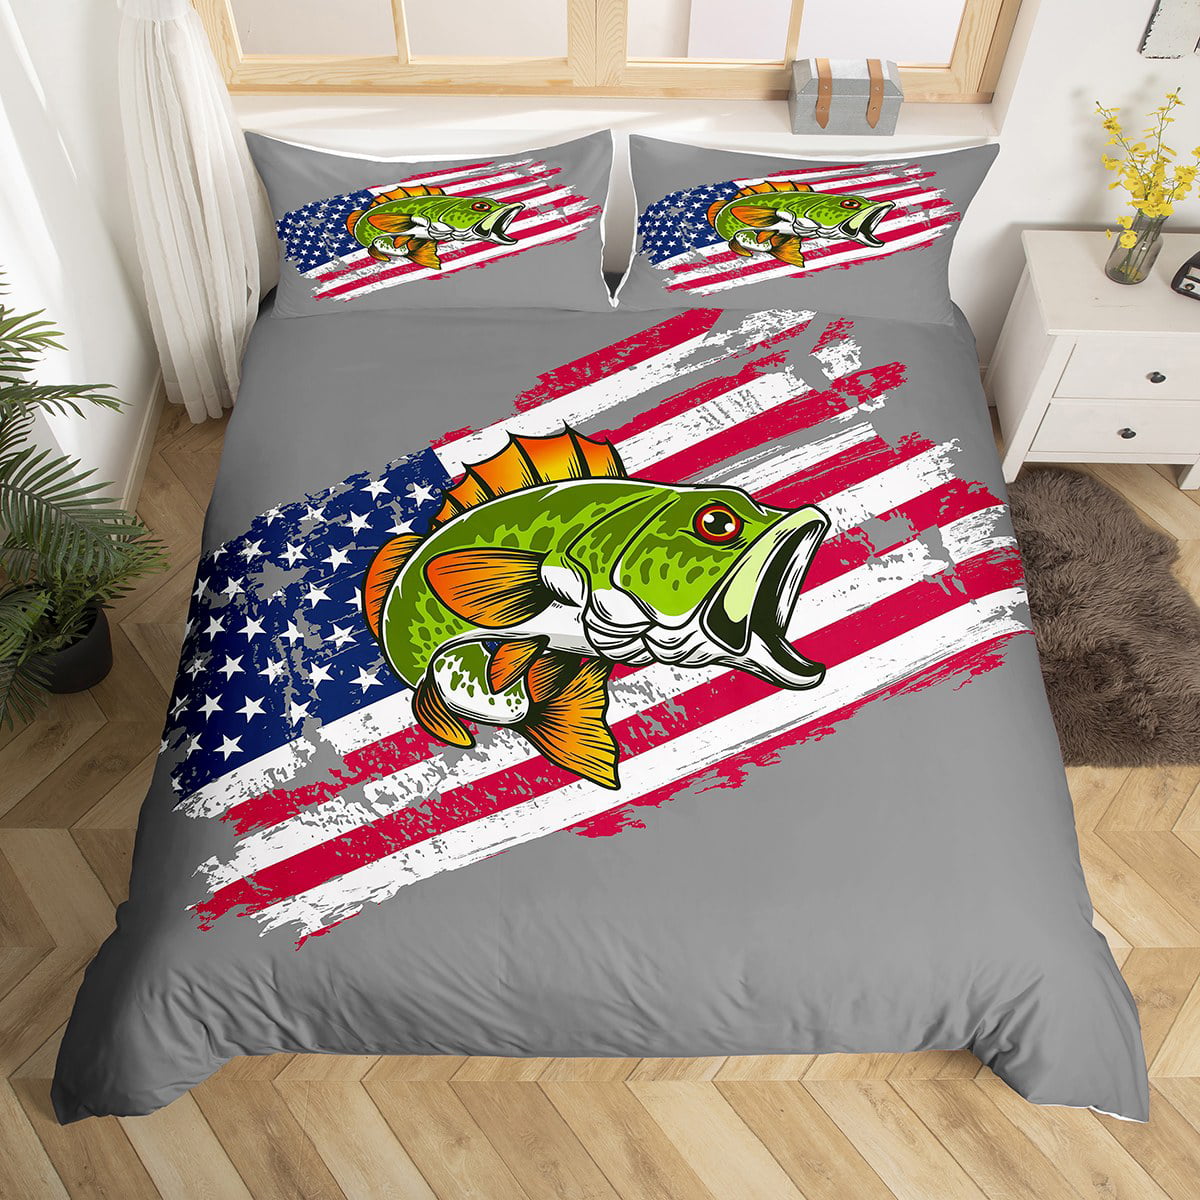 Big Pike Fishing Comforter Set, Striped Bass American Flag Pattern Fishing  Bed Set For Boys Room Decor,Bed In A Bag For Teens With 2 Pillowcases.